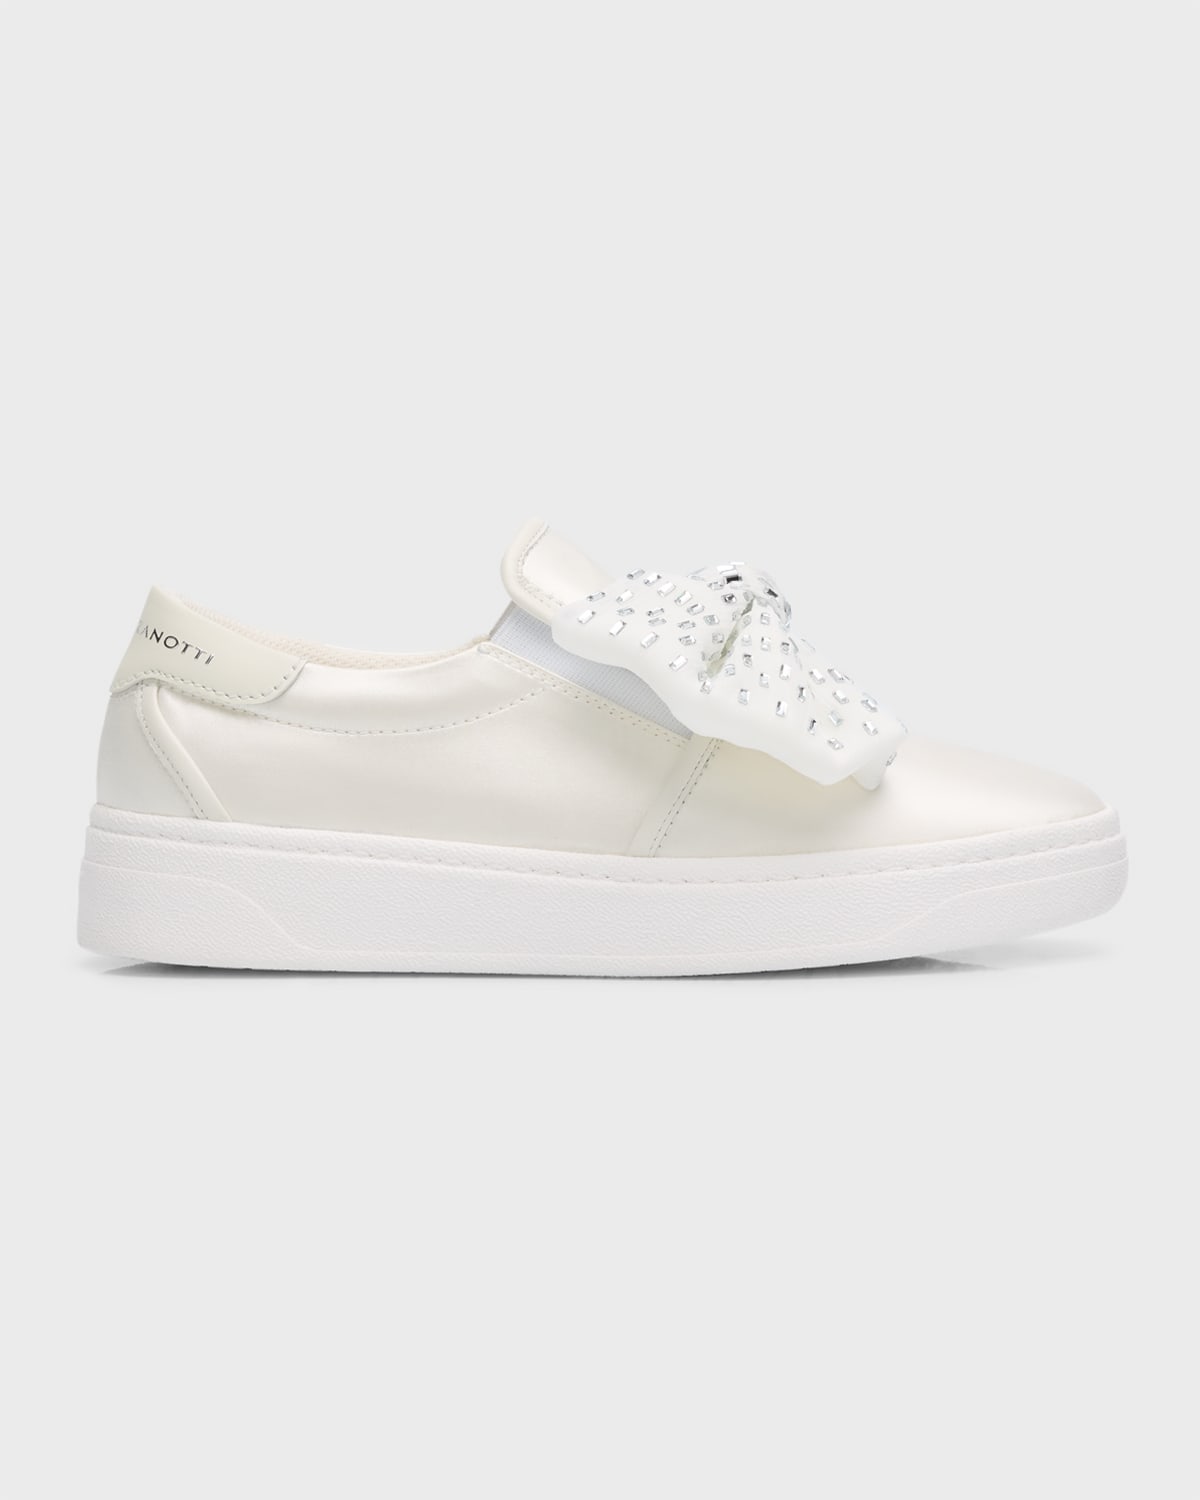 Satin Crystal Bow Slip-On Sneakers